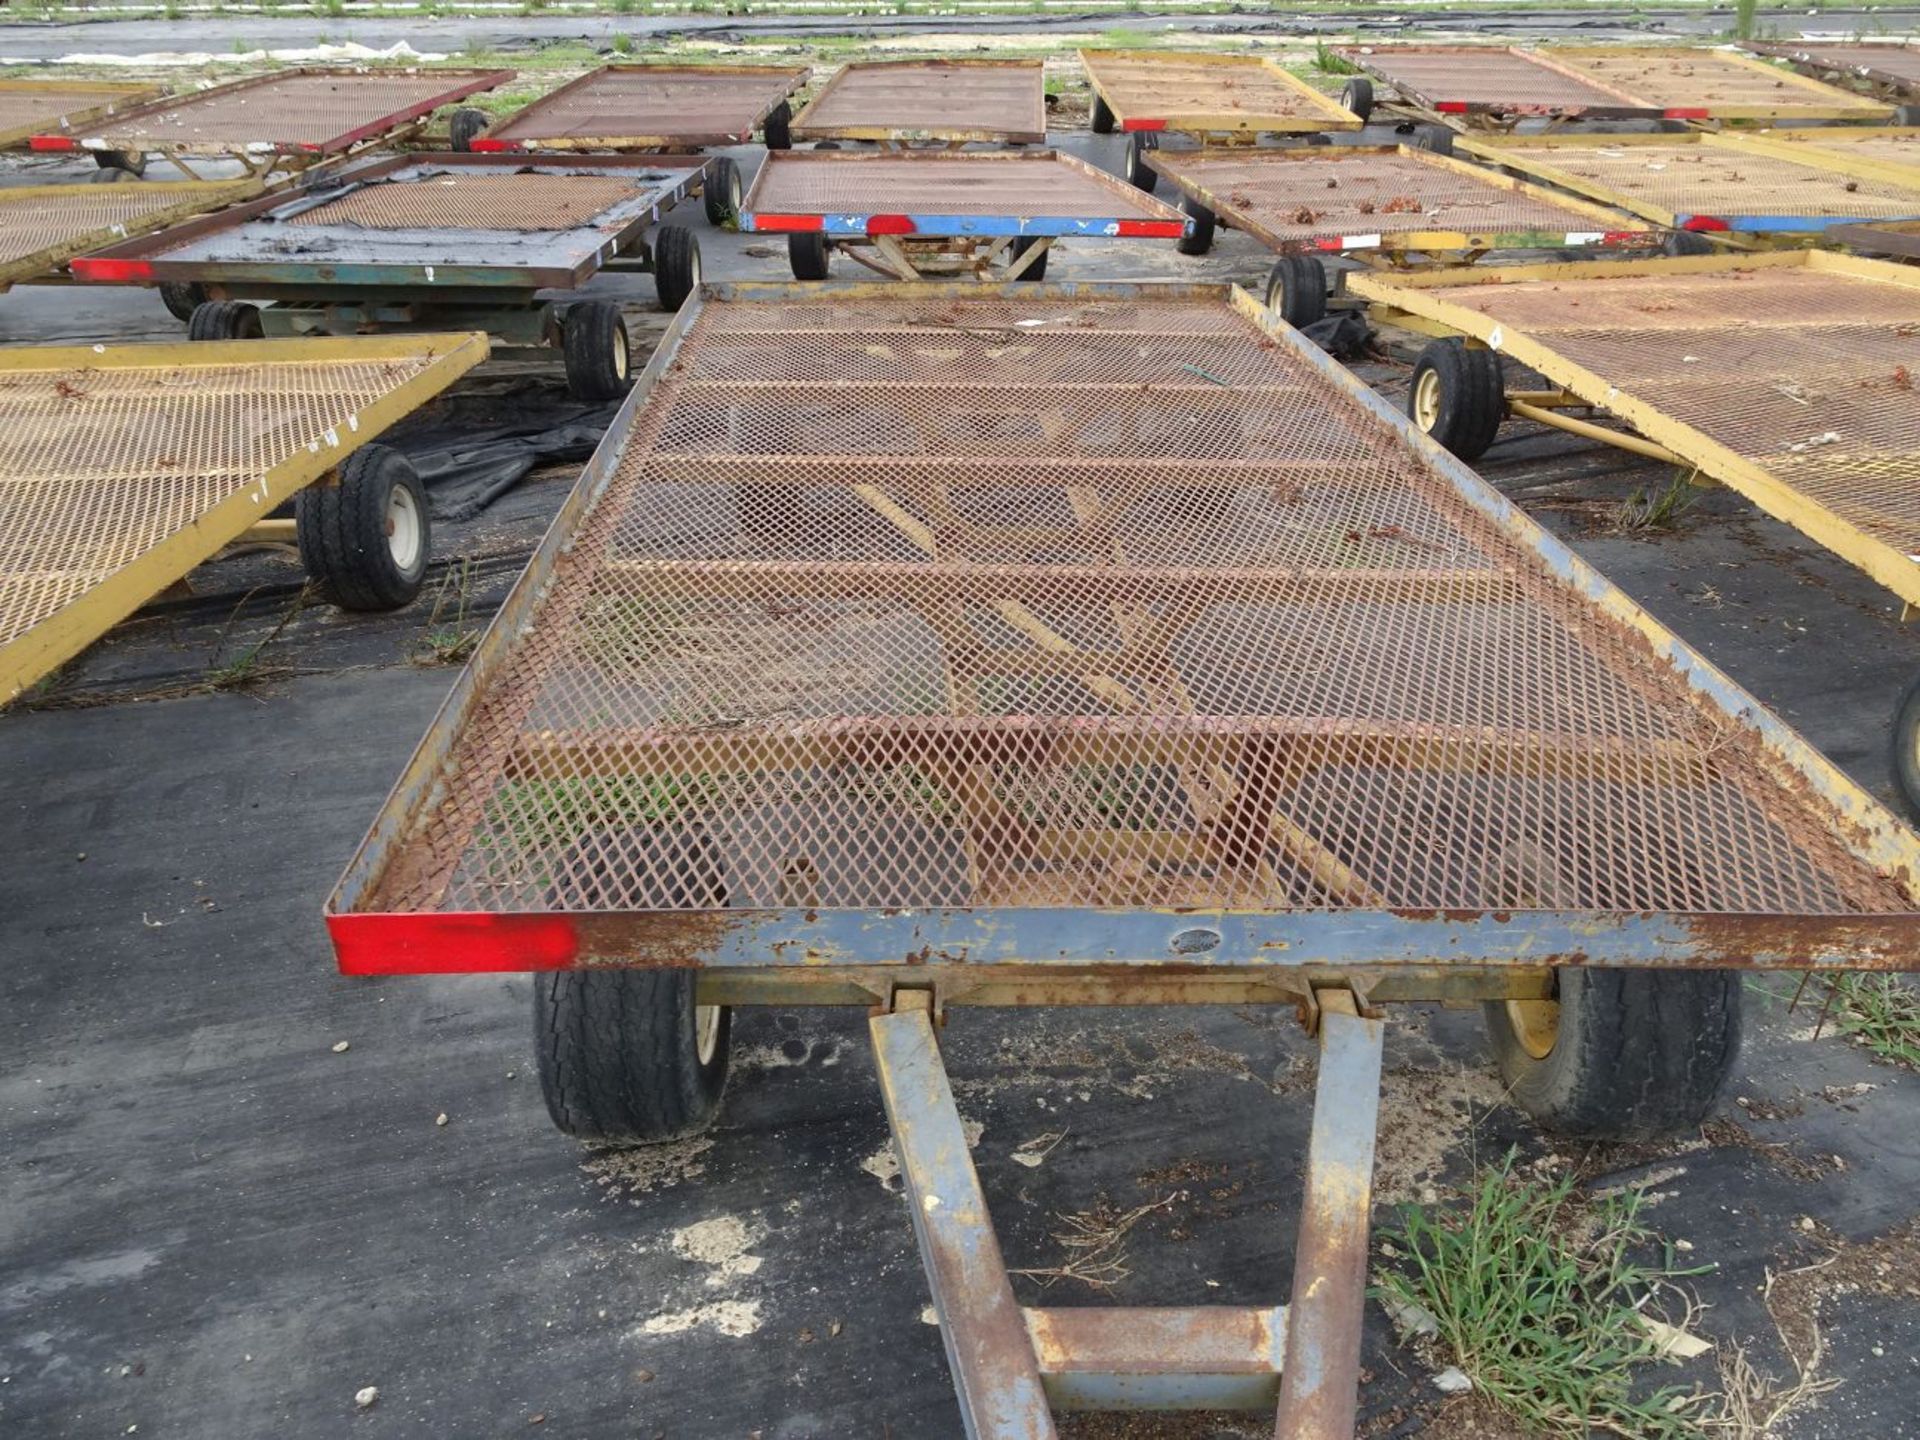 (6) SELF TRACKING TRAILERS, EACH IS PIN STYLE HITCH, EACH TRAILER BED IS 12' LONG x 6' WIDE (FOR - Image 2 of 3